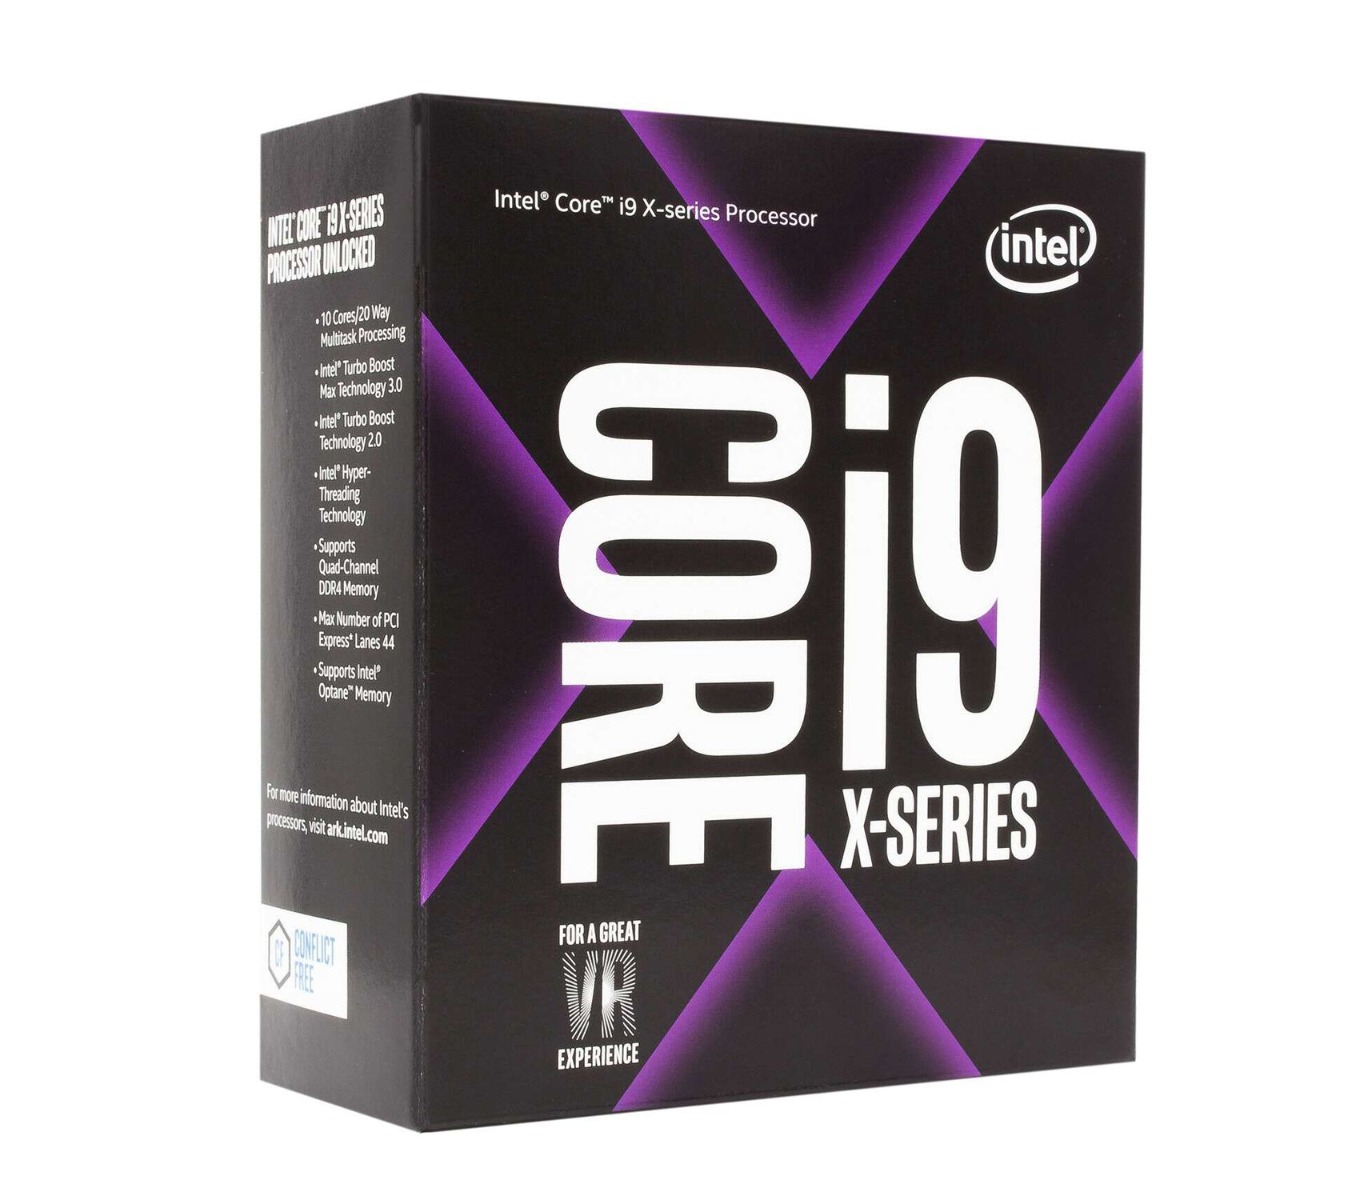 Intel Core i9-7960X X-Series 2.8 GHz 16-Core Processor (Retail Packaging)